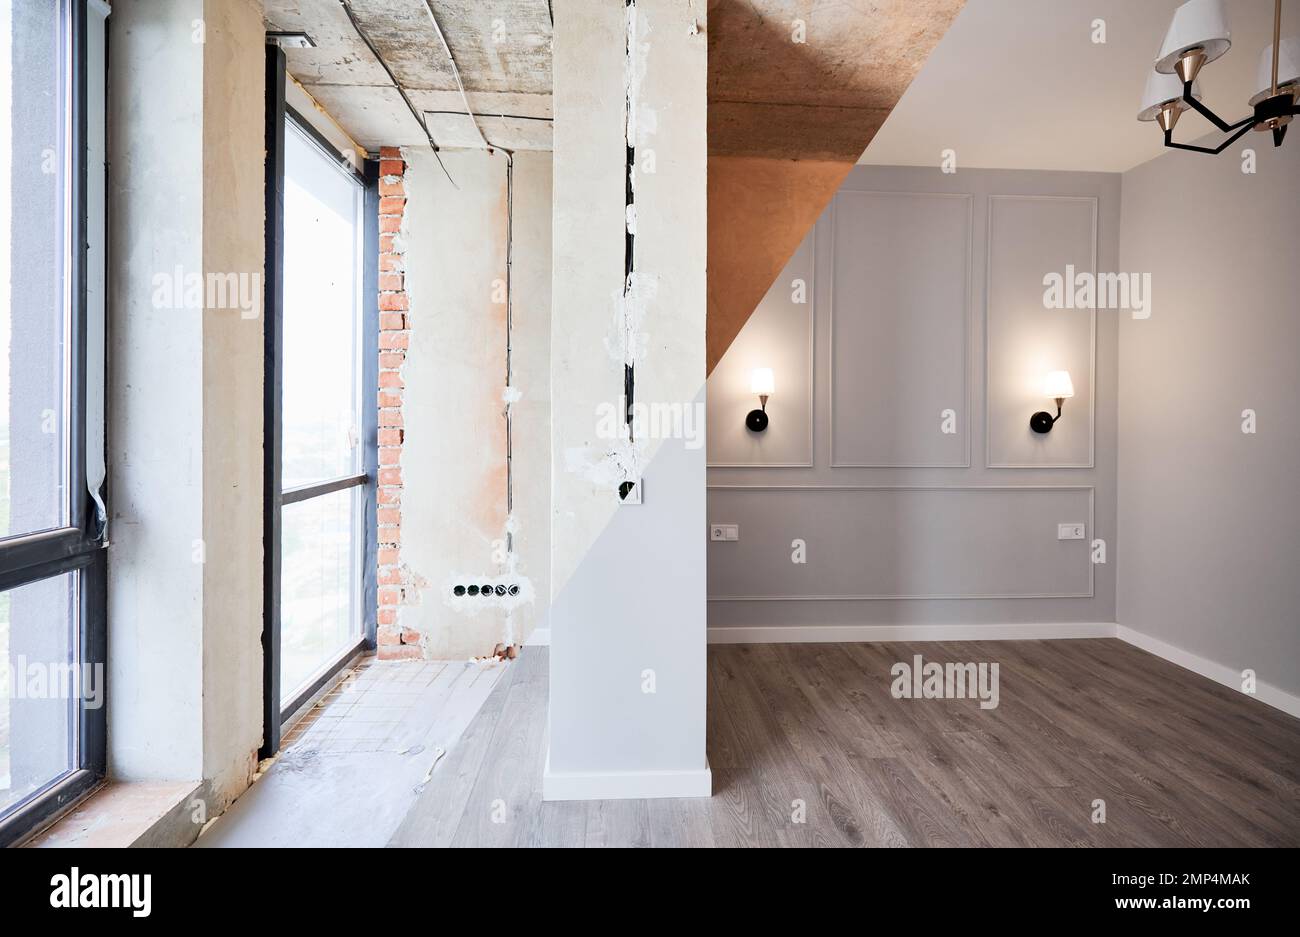 Comparison of apartment room with large panoramic window before and after refurbishment. Old room before restoration and new renovated room with elegant interior design. Stock Photo